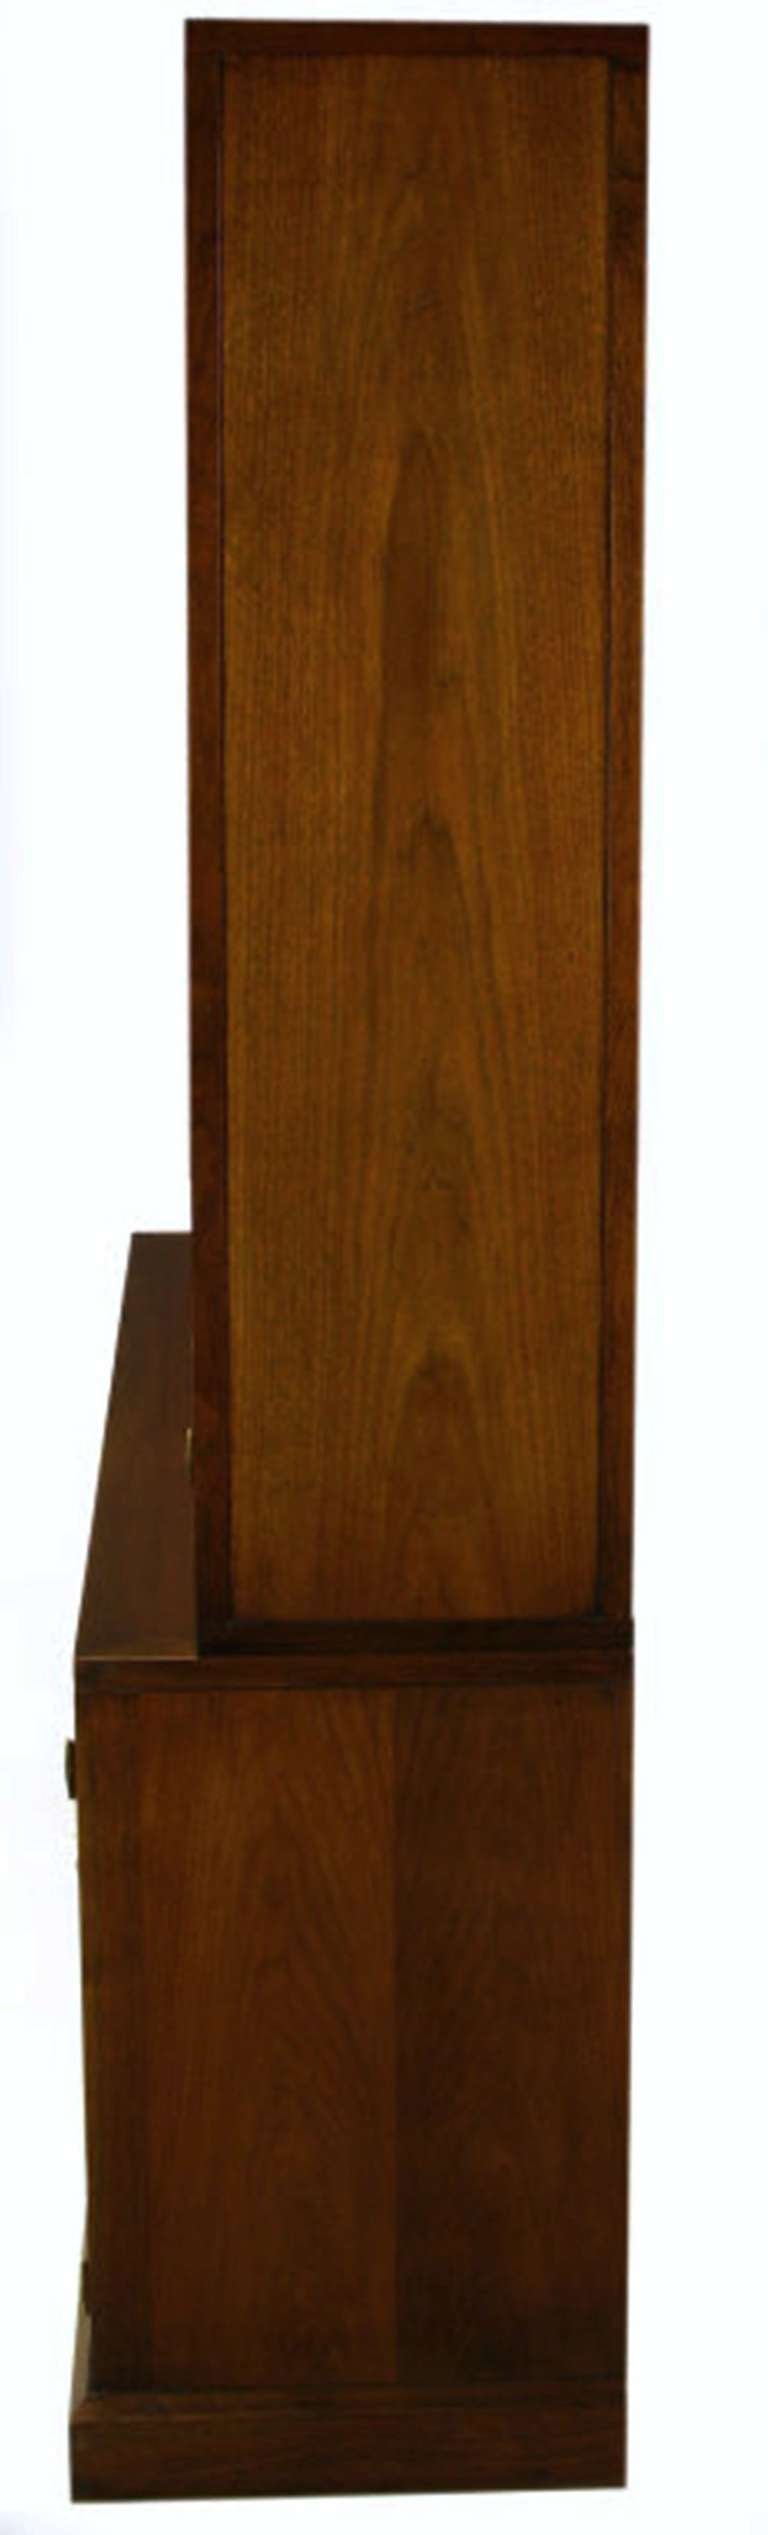 Mid-20th Century Custom Walnut Tall Cabinet With Inset Cane Panels